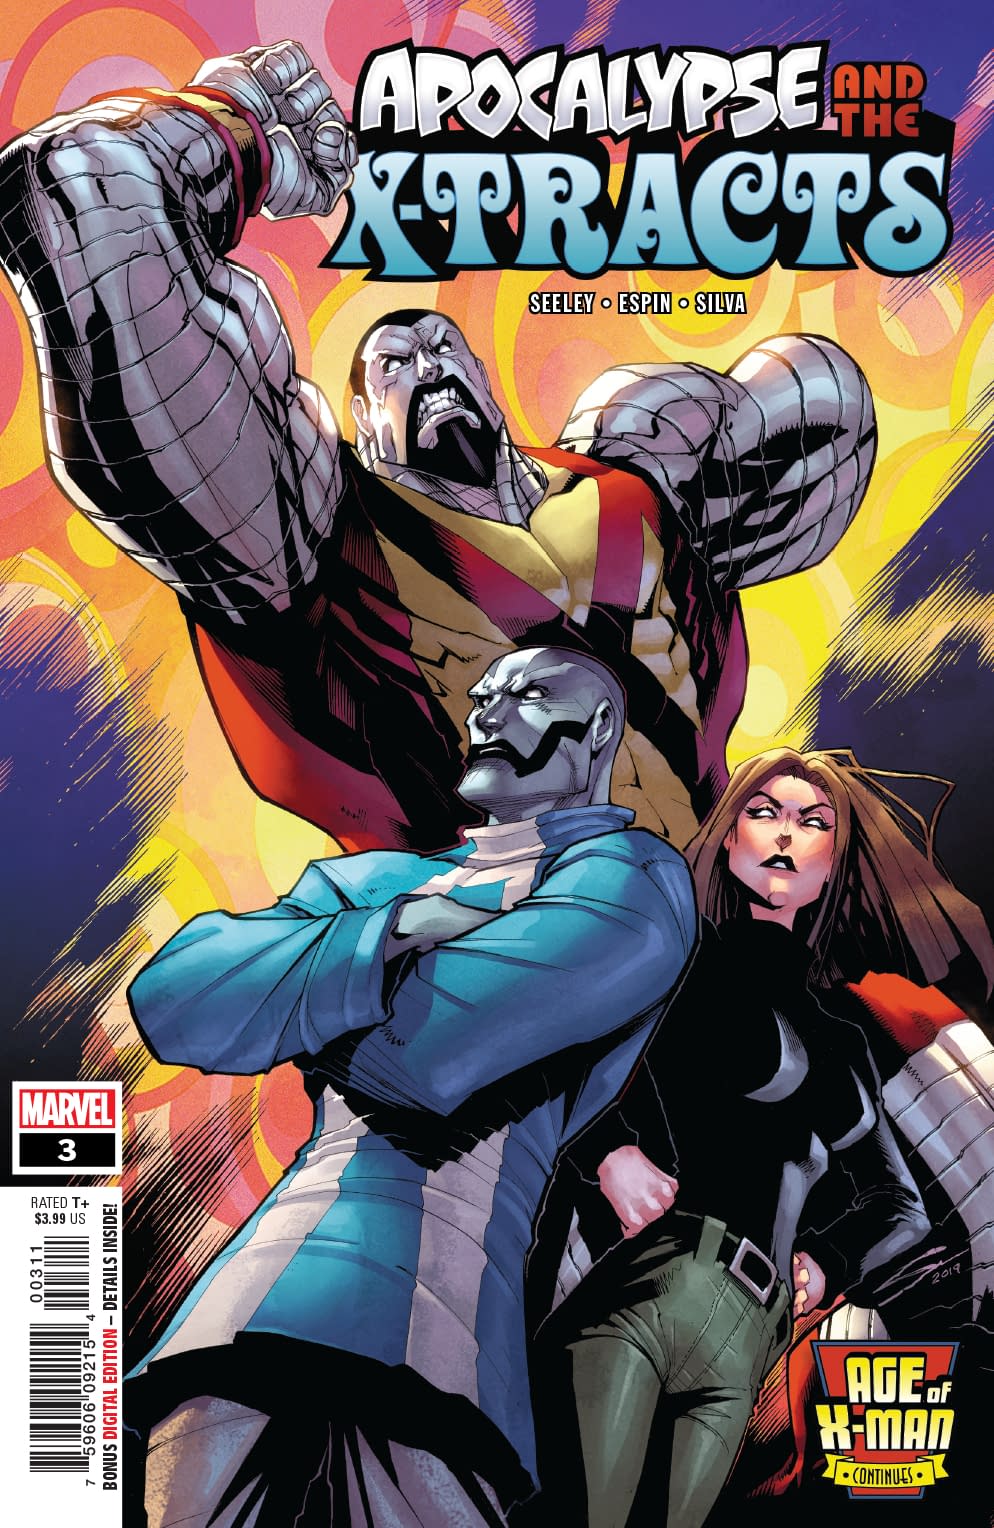 Will Kitty and Peter Rekindle Their Love Affair? Apocalypse and the X-Tracts #3 Preview